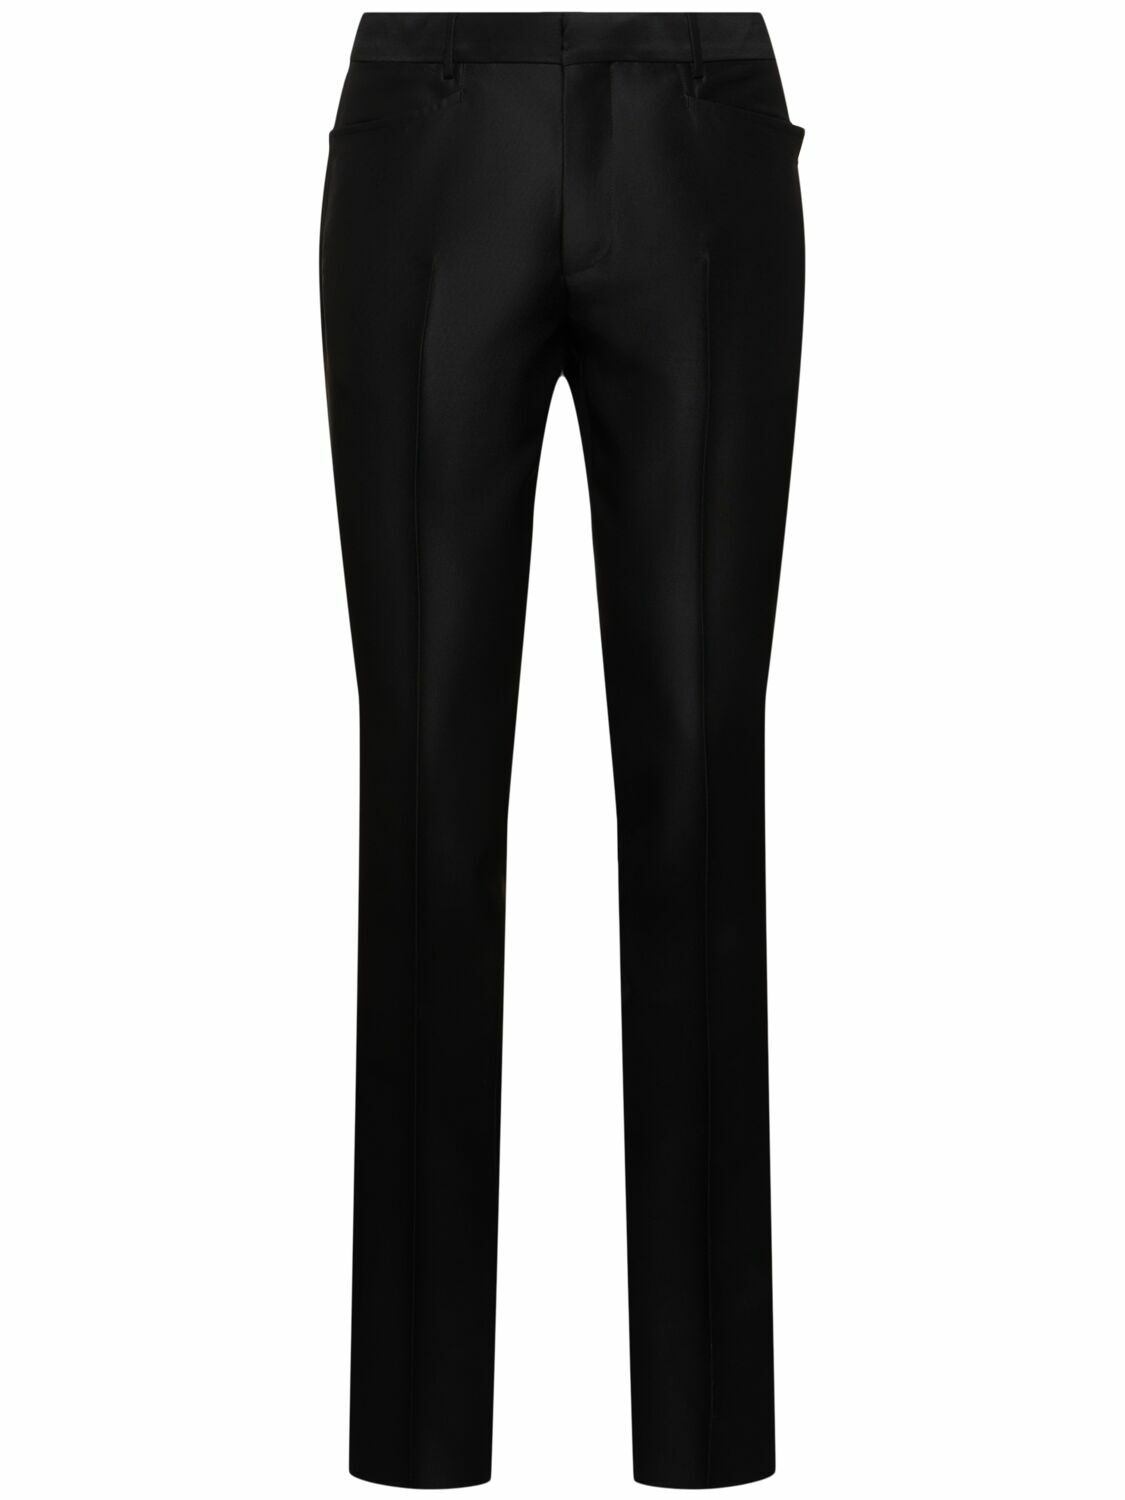 Photo: TOM FORD Atticus Wool Blend Faille Pants